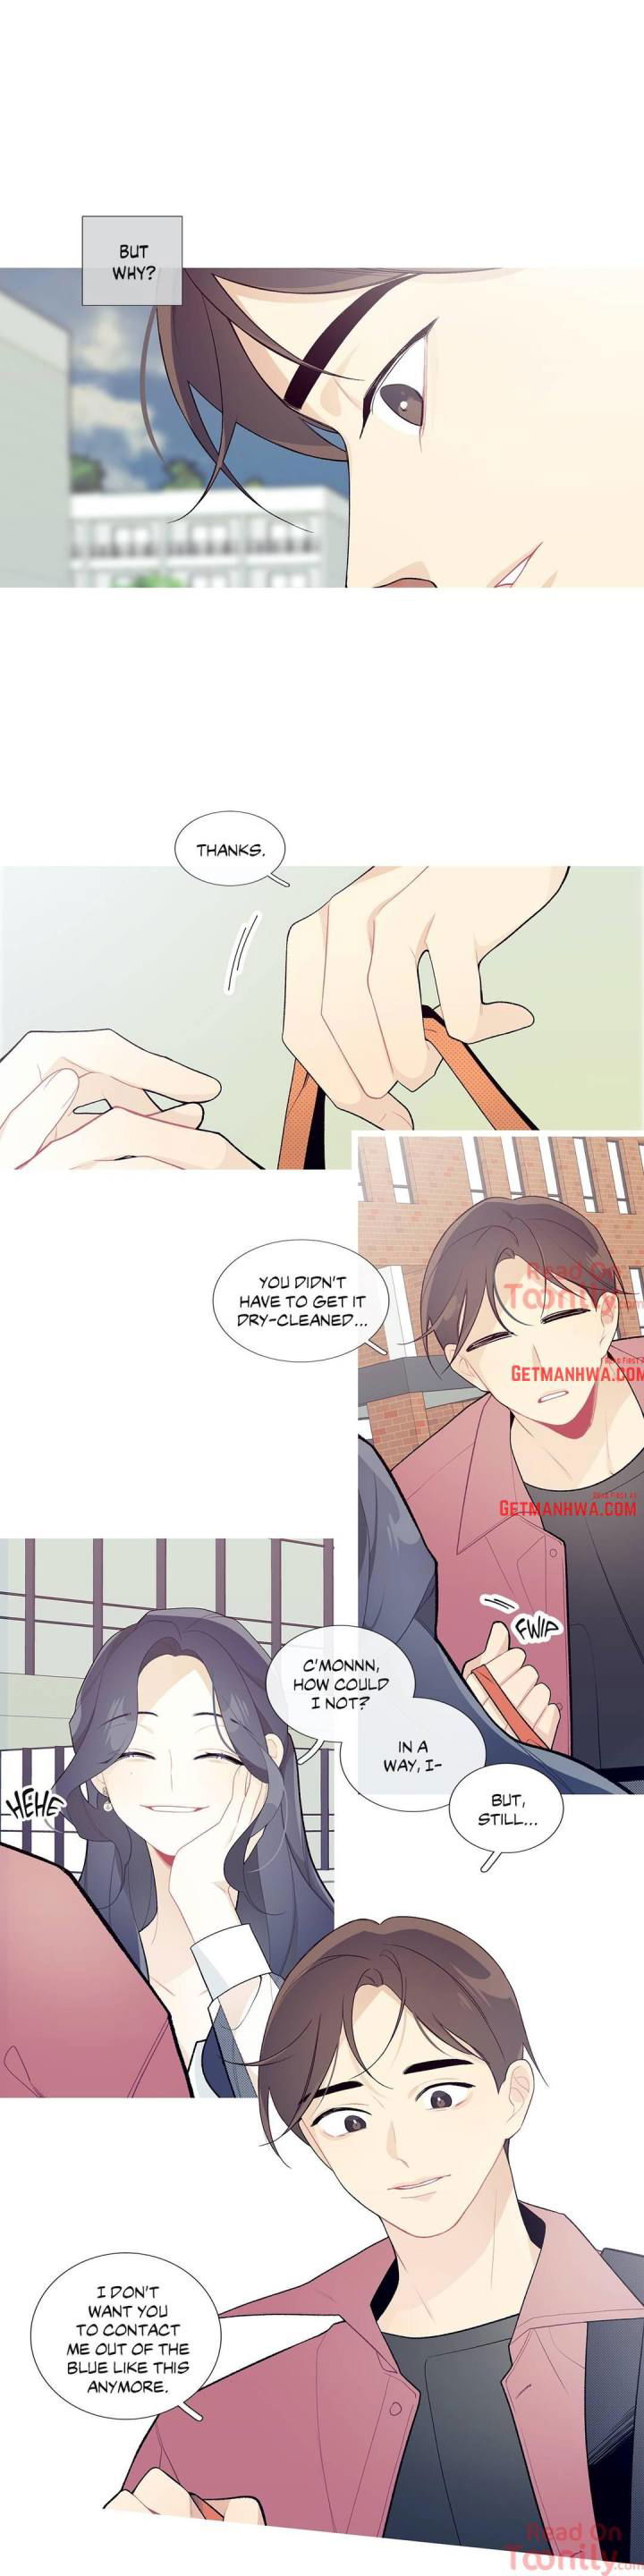 whats-going-on-chap-33-4